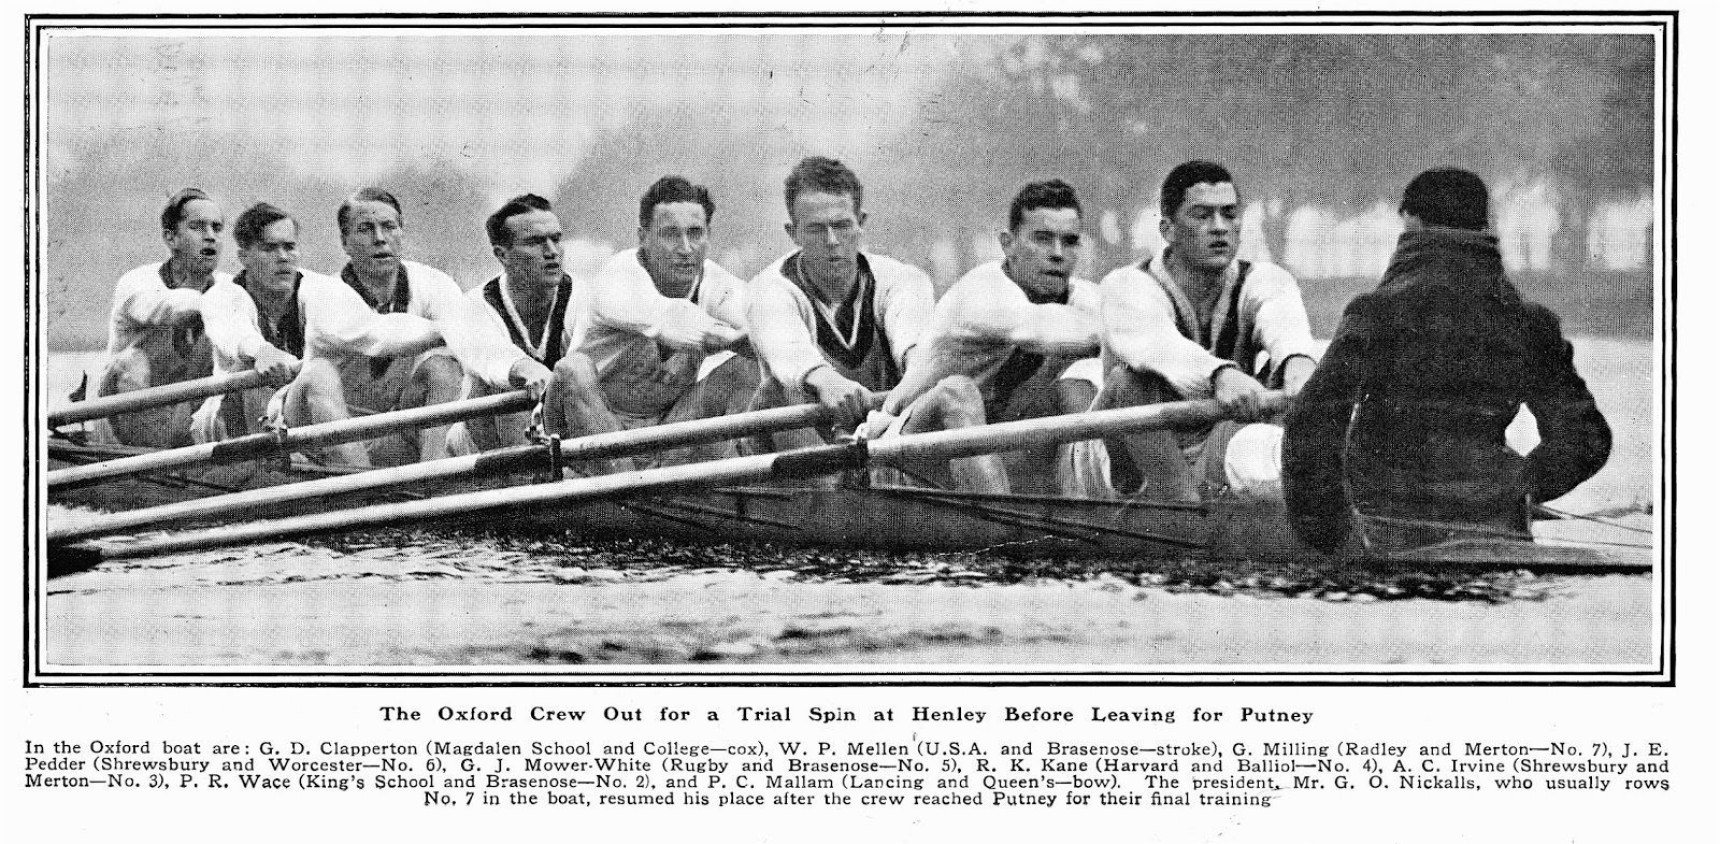 A photo from the 1923 Oxford vs Cambridge Boat Race